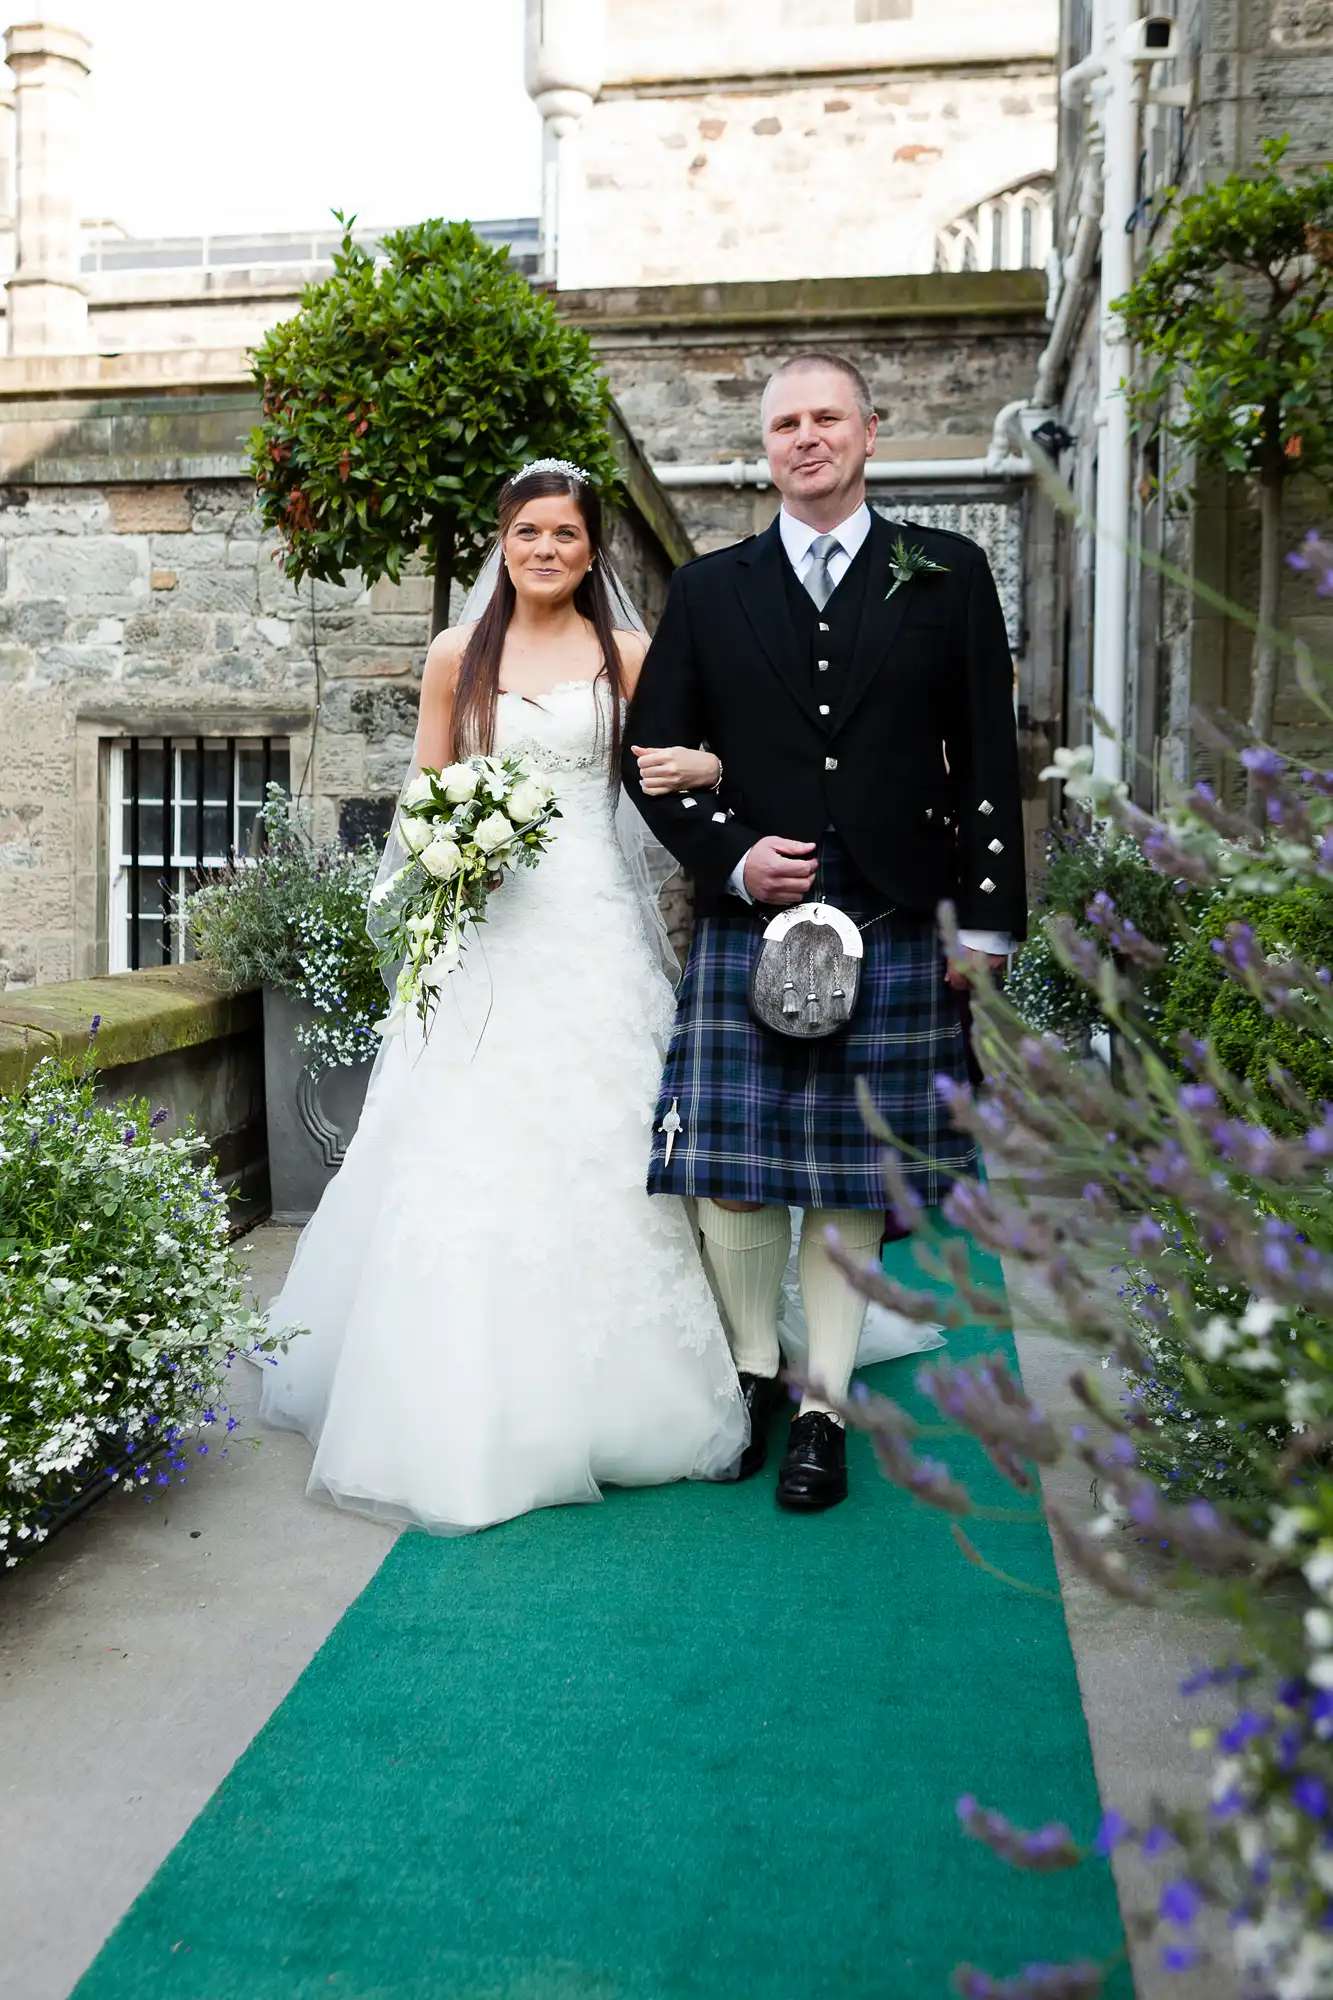 Bride in a white dress and groom in a kilt standing on a green carpet surrounded by flowers at a castle wedding.